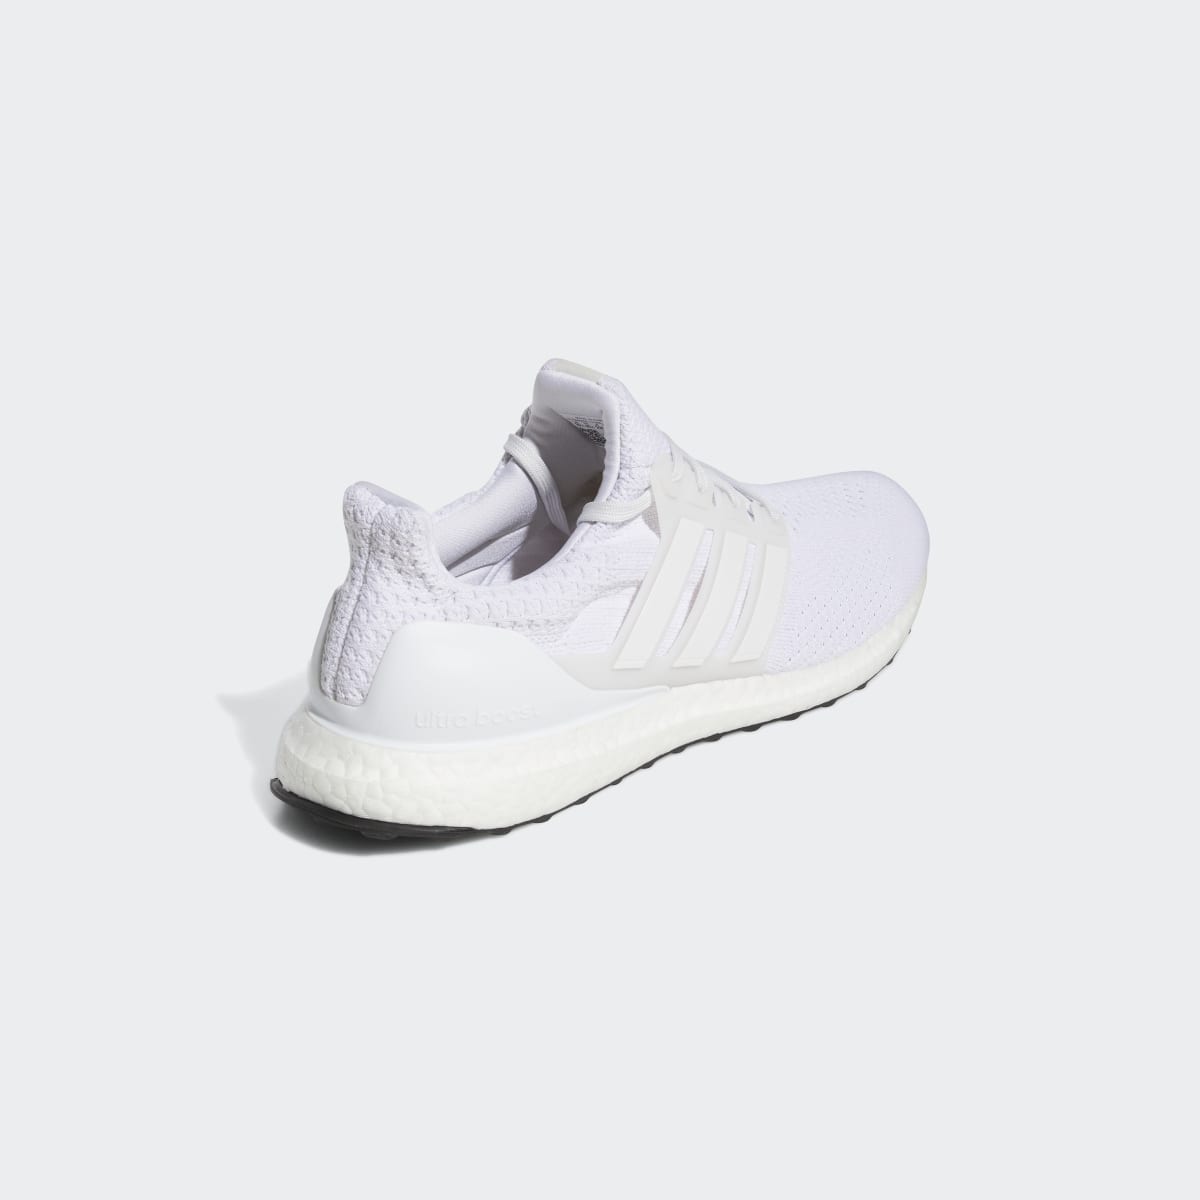 Adidas Ultraboost 5 DNA Running Lifestyle Shoes. 7